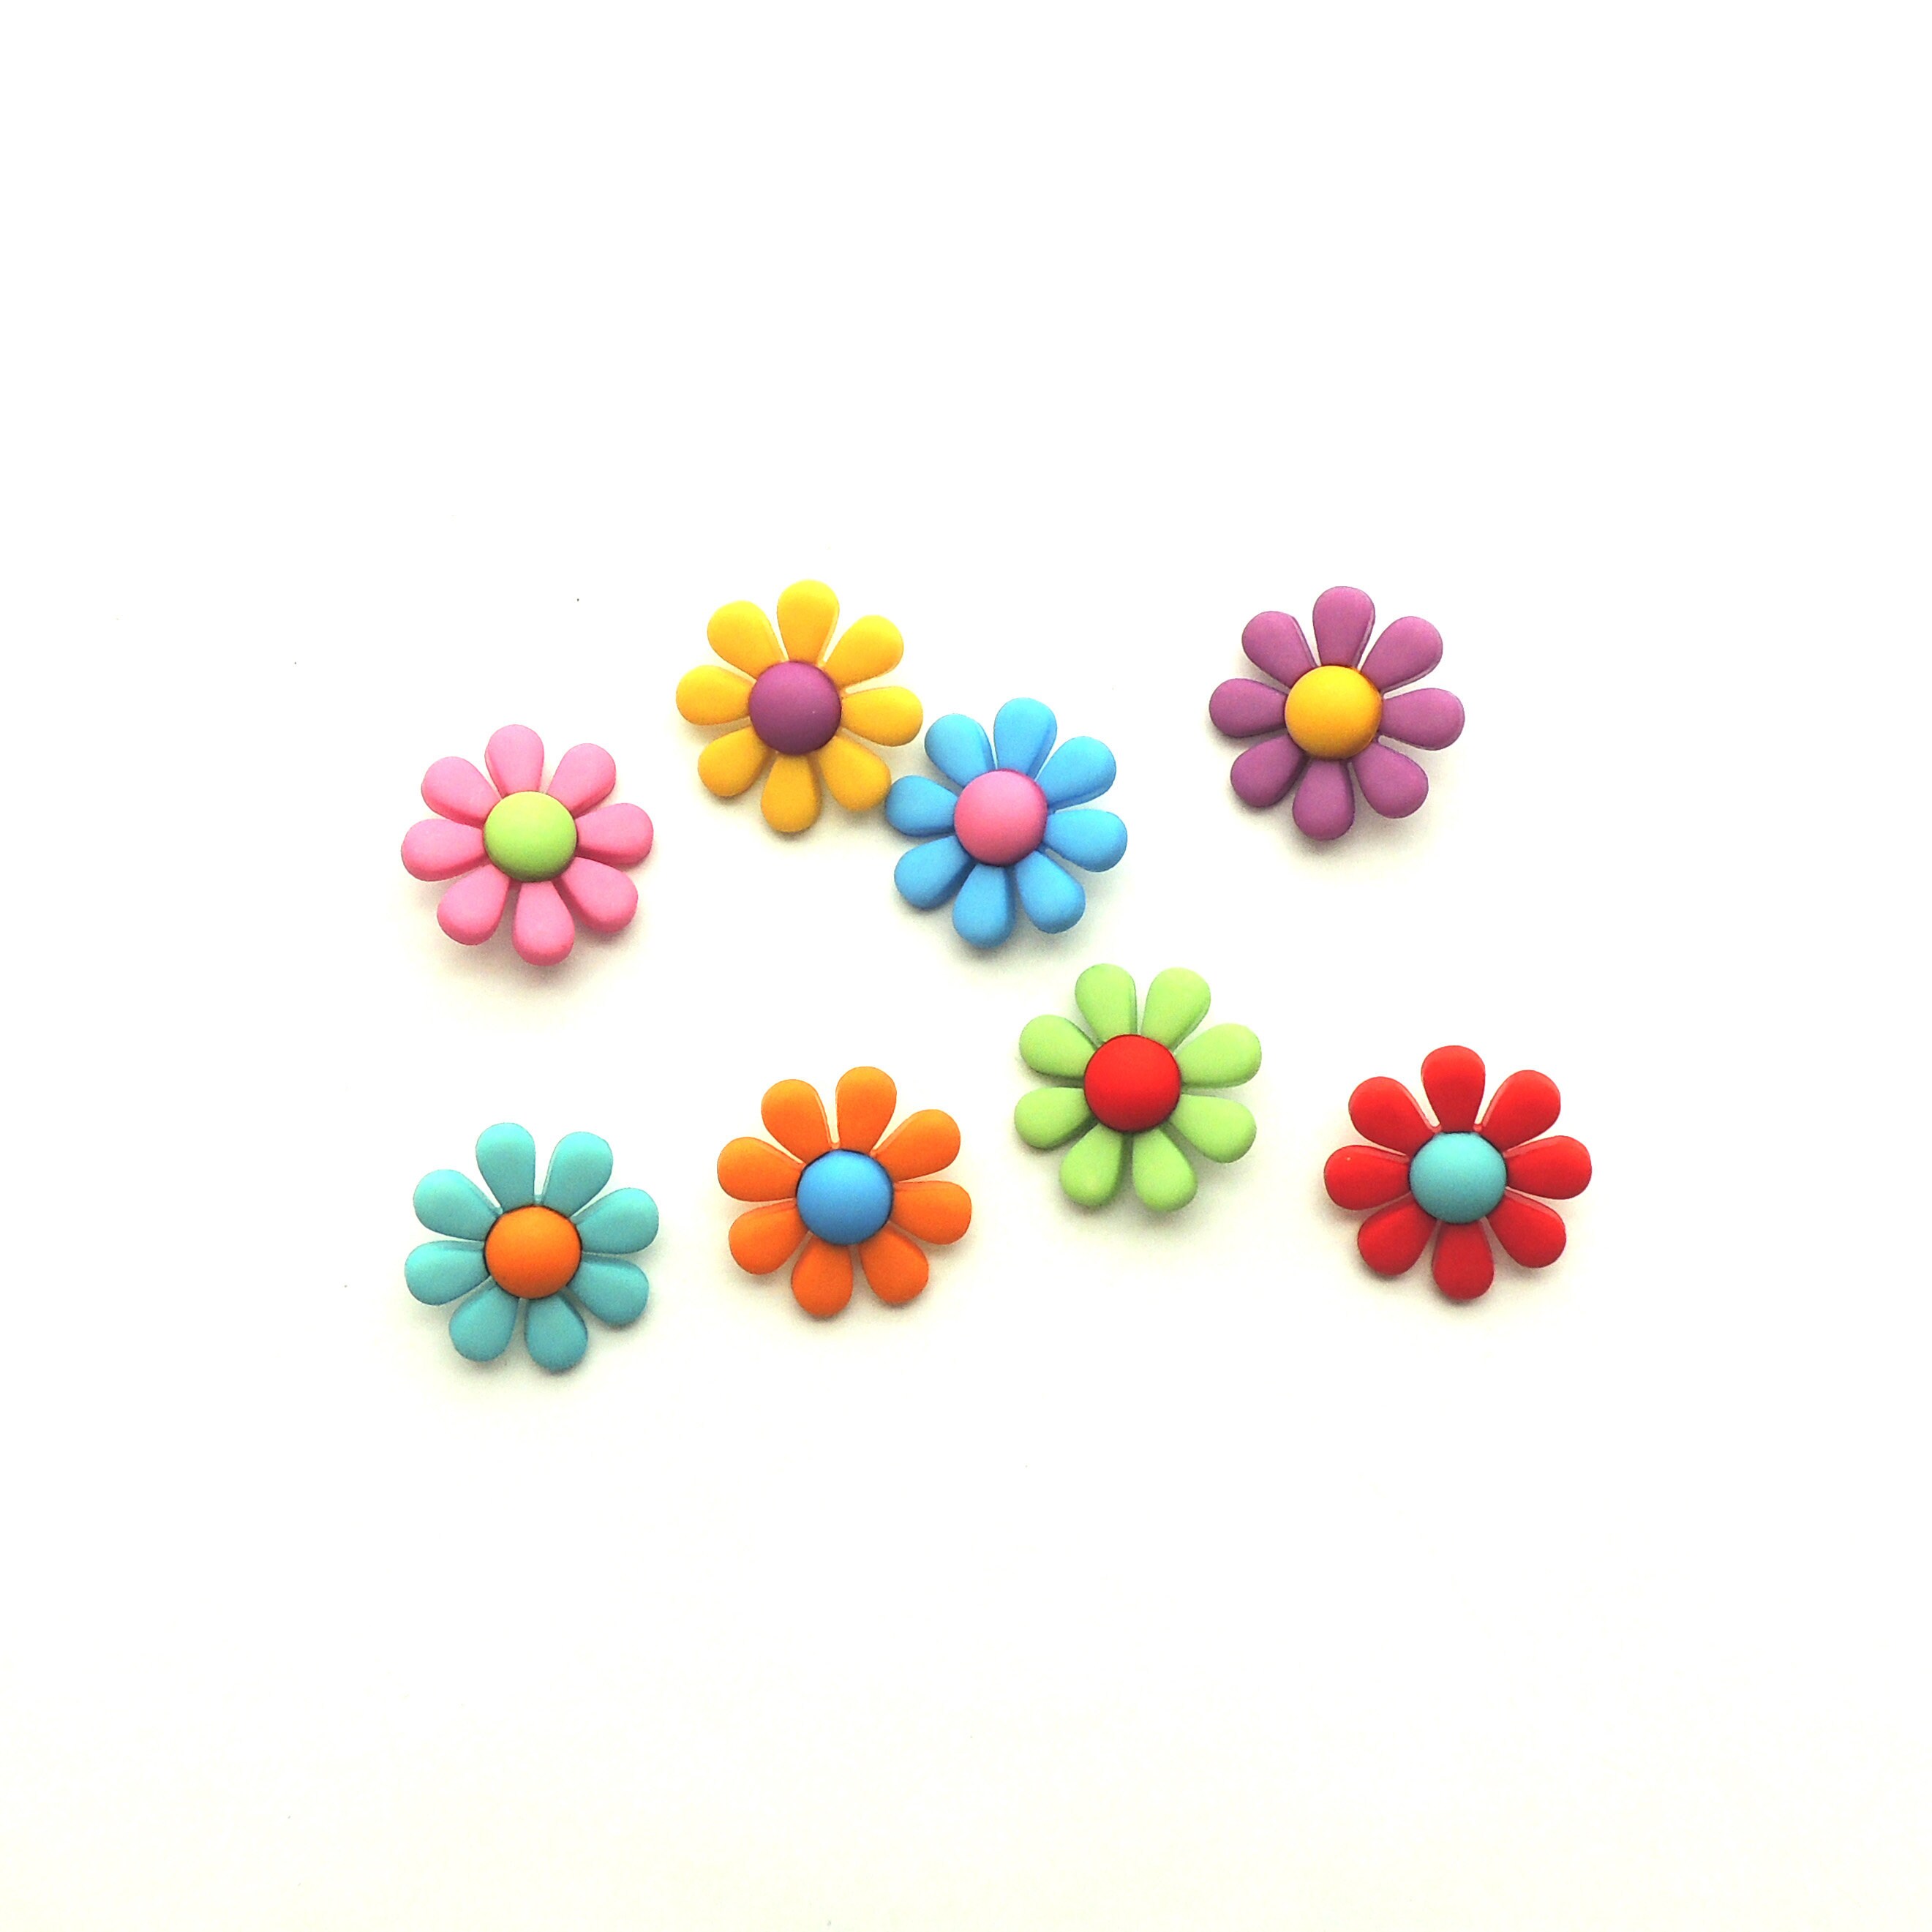 Retro Flowers by Buttons Galore // Novelty Flower Floral | Etsy